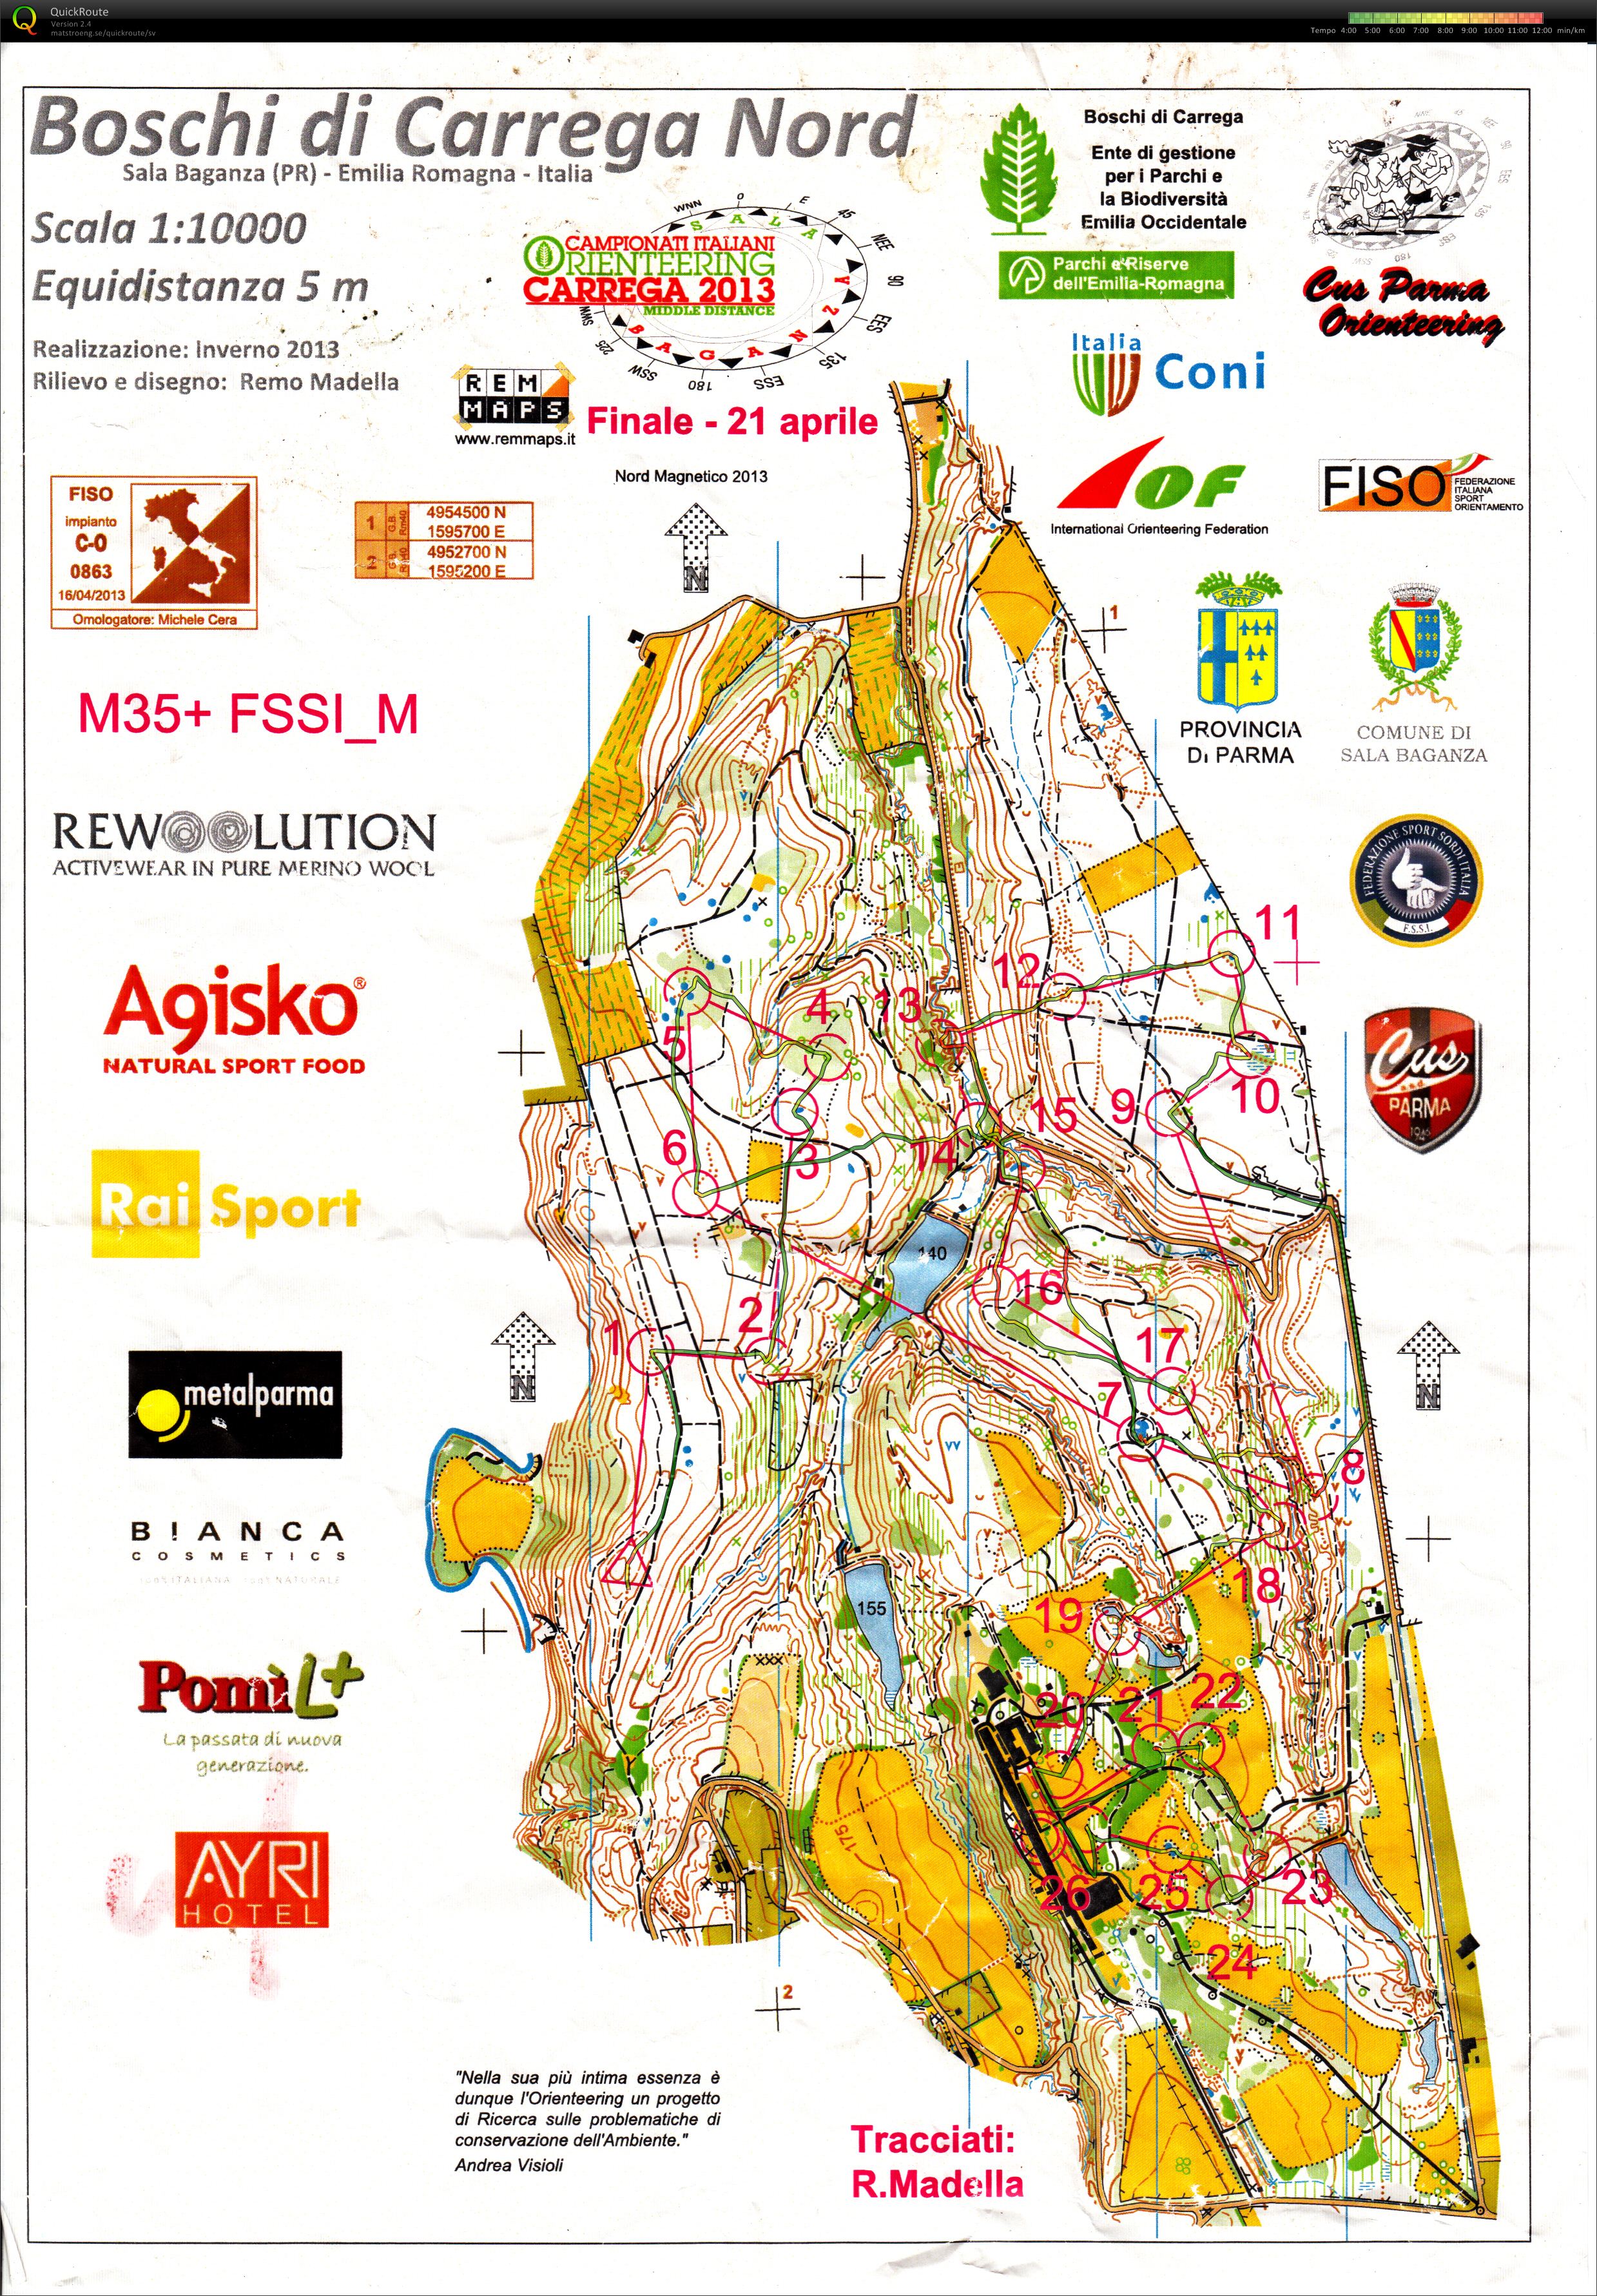 Italian Championship Middle Distance Final (2013-04-21)